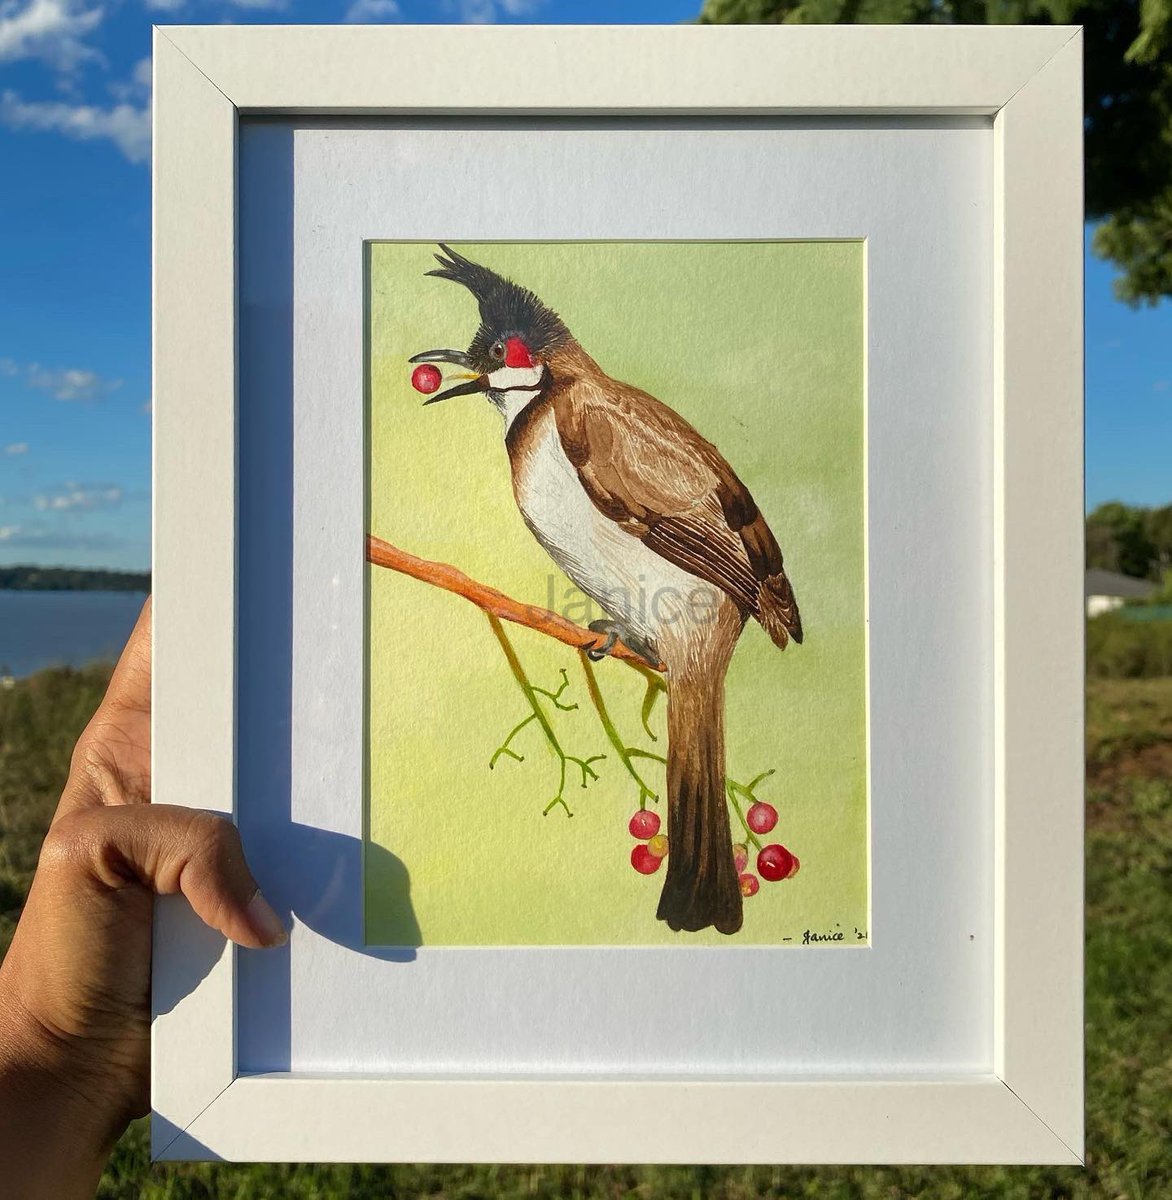 Created this artwork for a friend who loves these melodious birds - Red whiskered bulbul 🍒

#wildlifeartist #birdart #bulbul #redwhiskeredbulbul #birds #birdlife #sciencecommunication #storytelling #wildlifeart